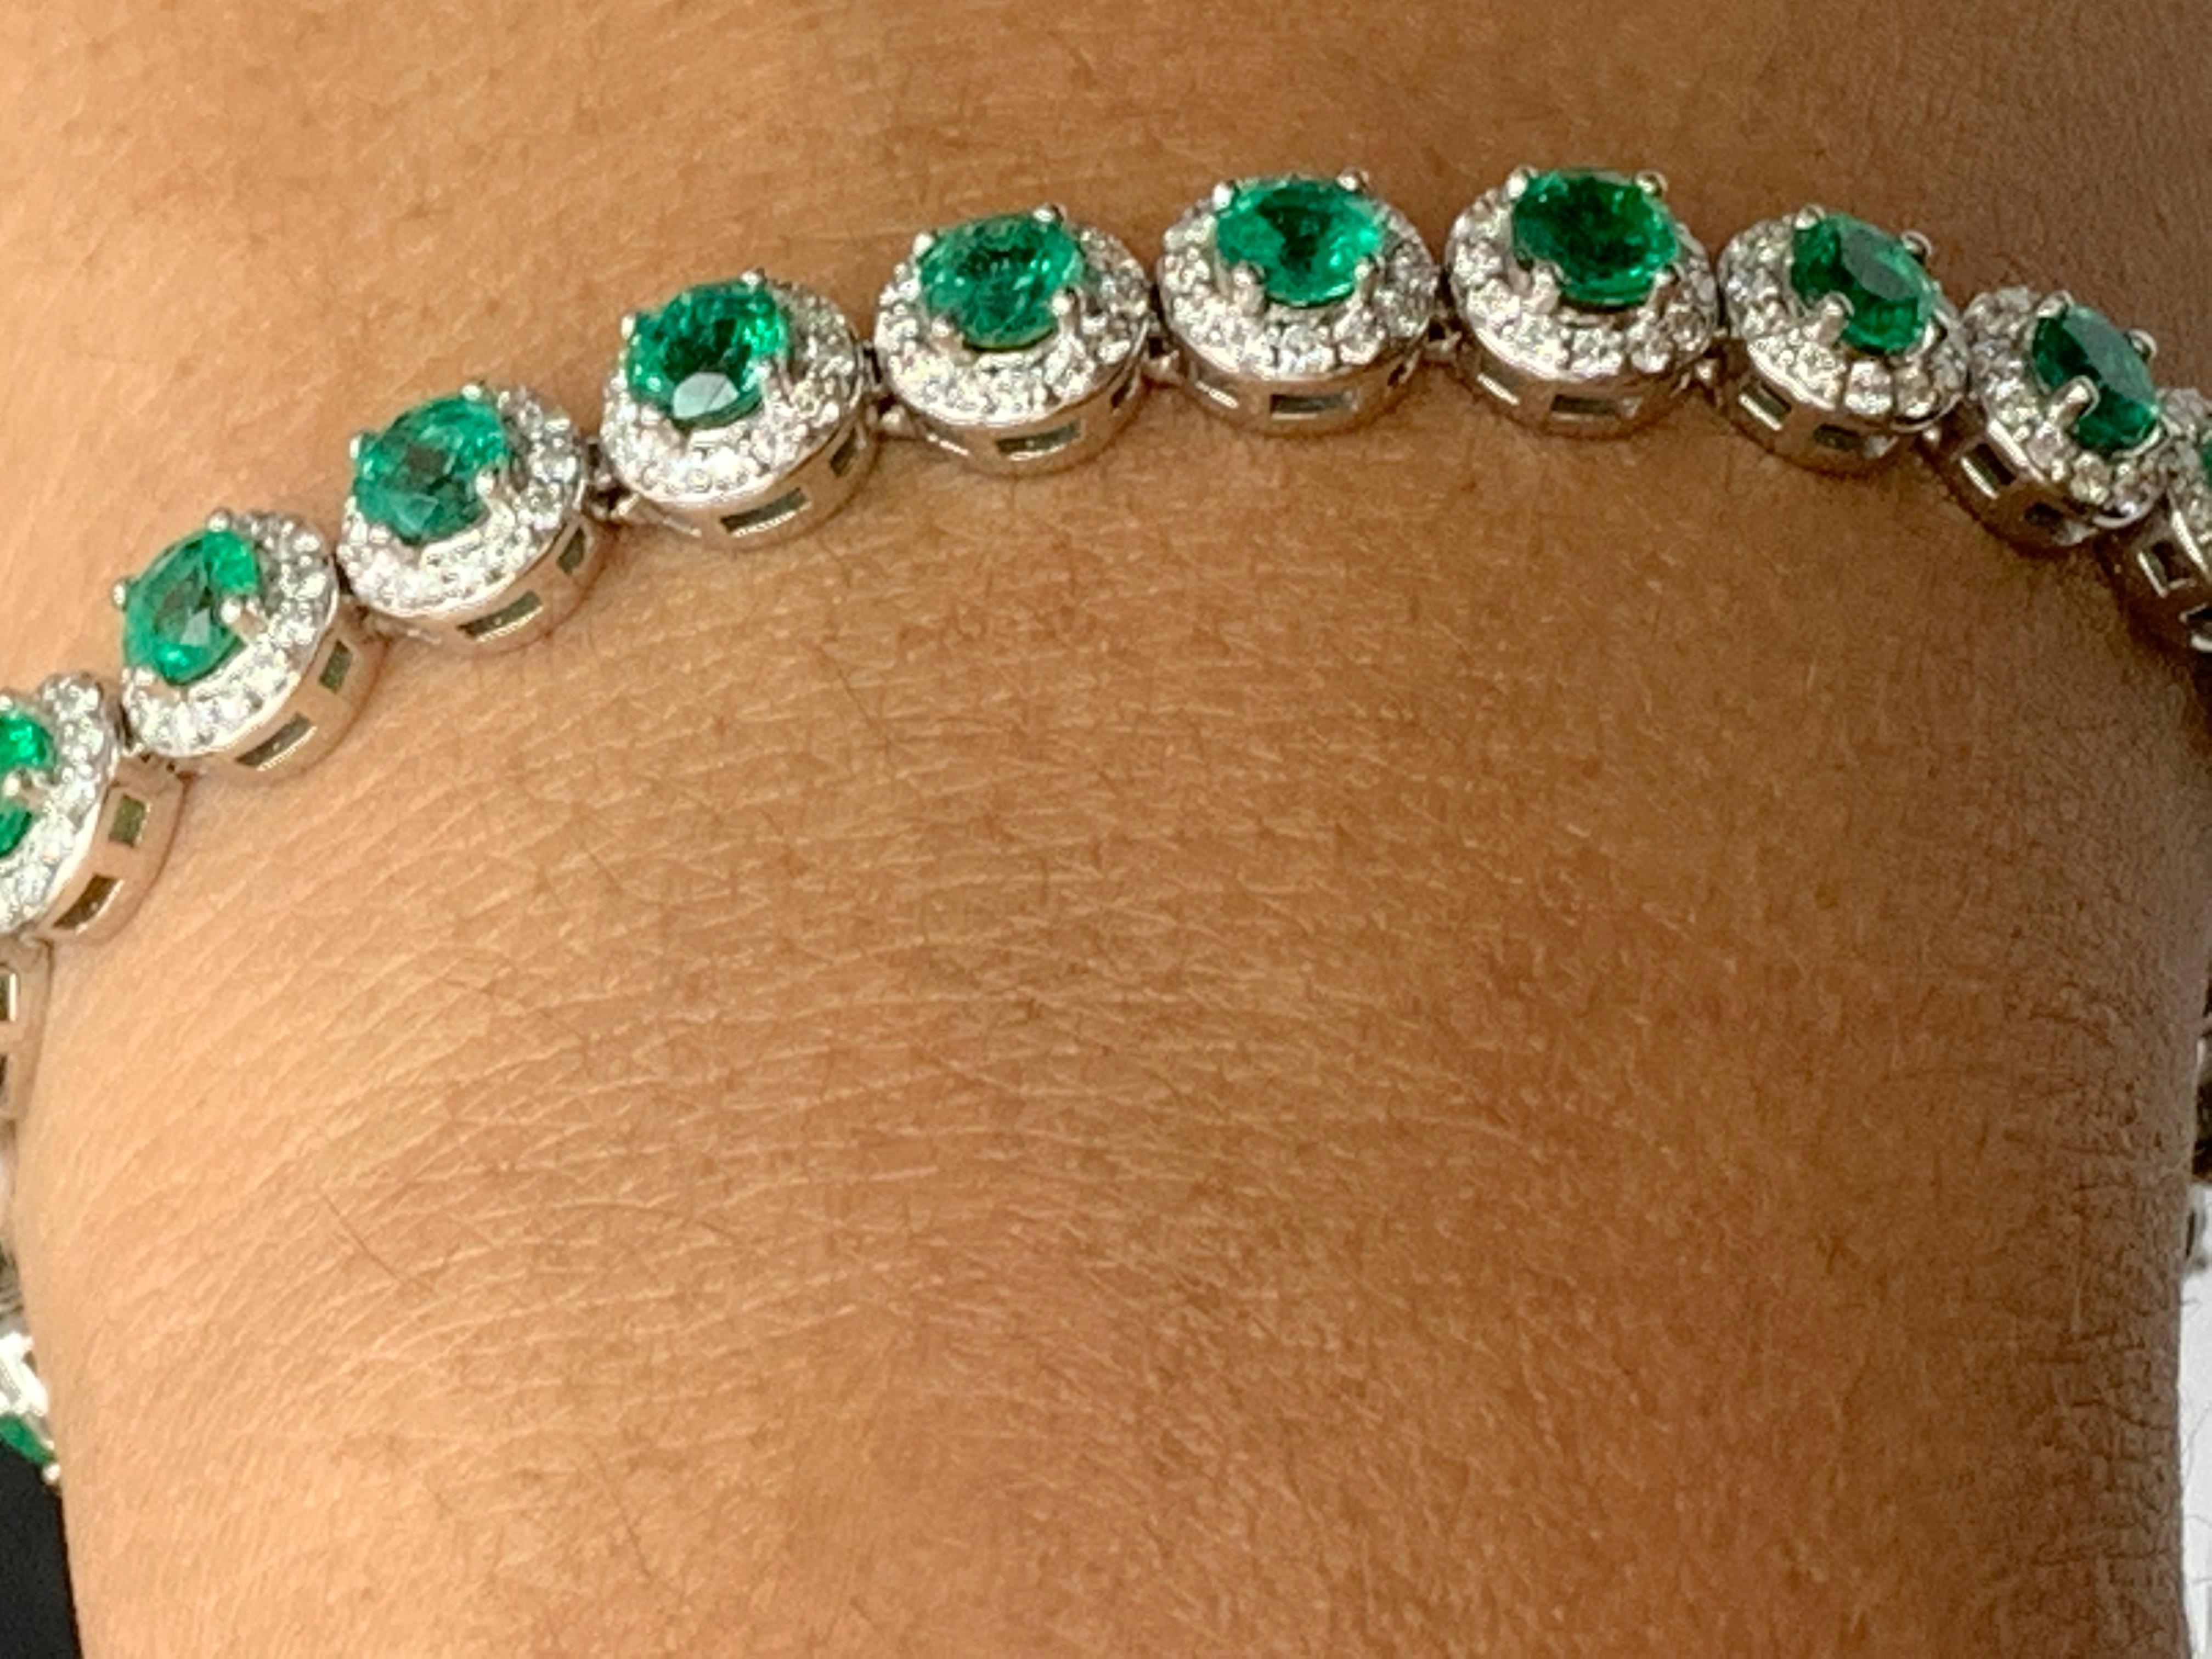 This gorgeous bracelet features 26 round brilliant emeralds weighing 6.94 carats total. Each stone is surrounded by a single row of small round 338 diamonds weighing 2.31 carats total. Set in 14k white gold.

Style available in different price